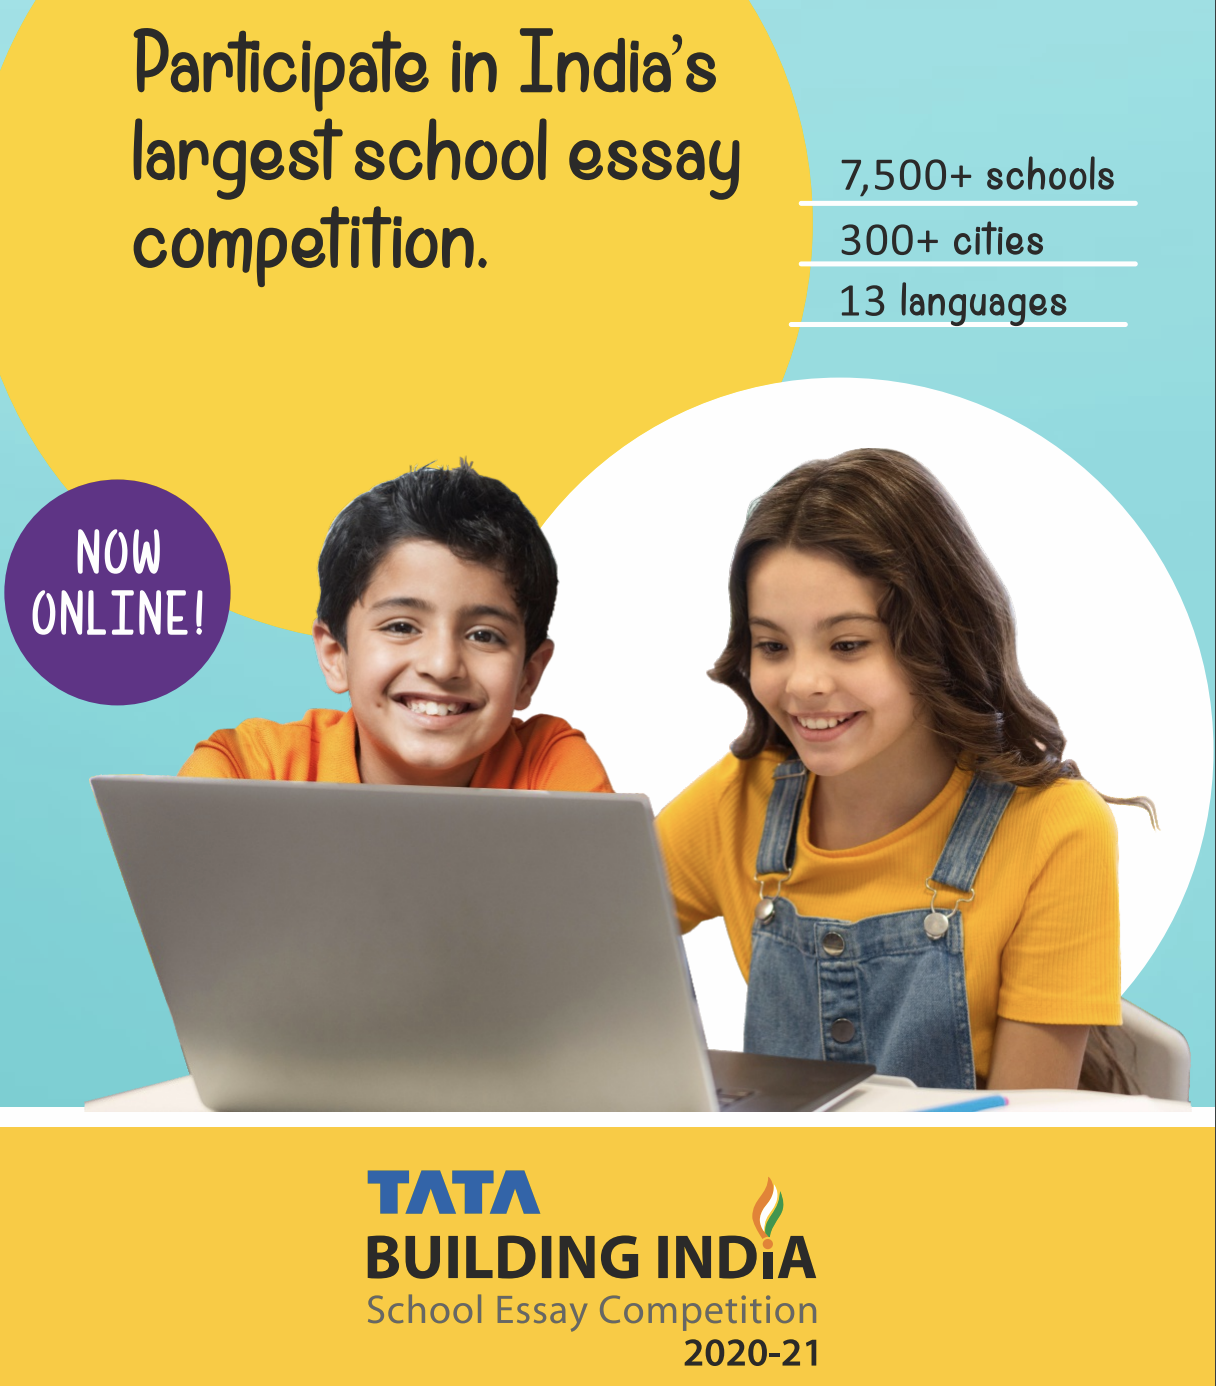 tata essay writing competition 2022 topic